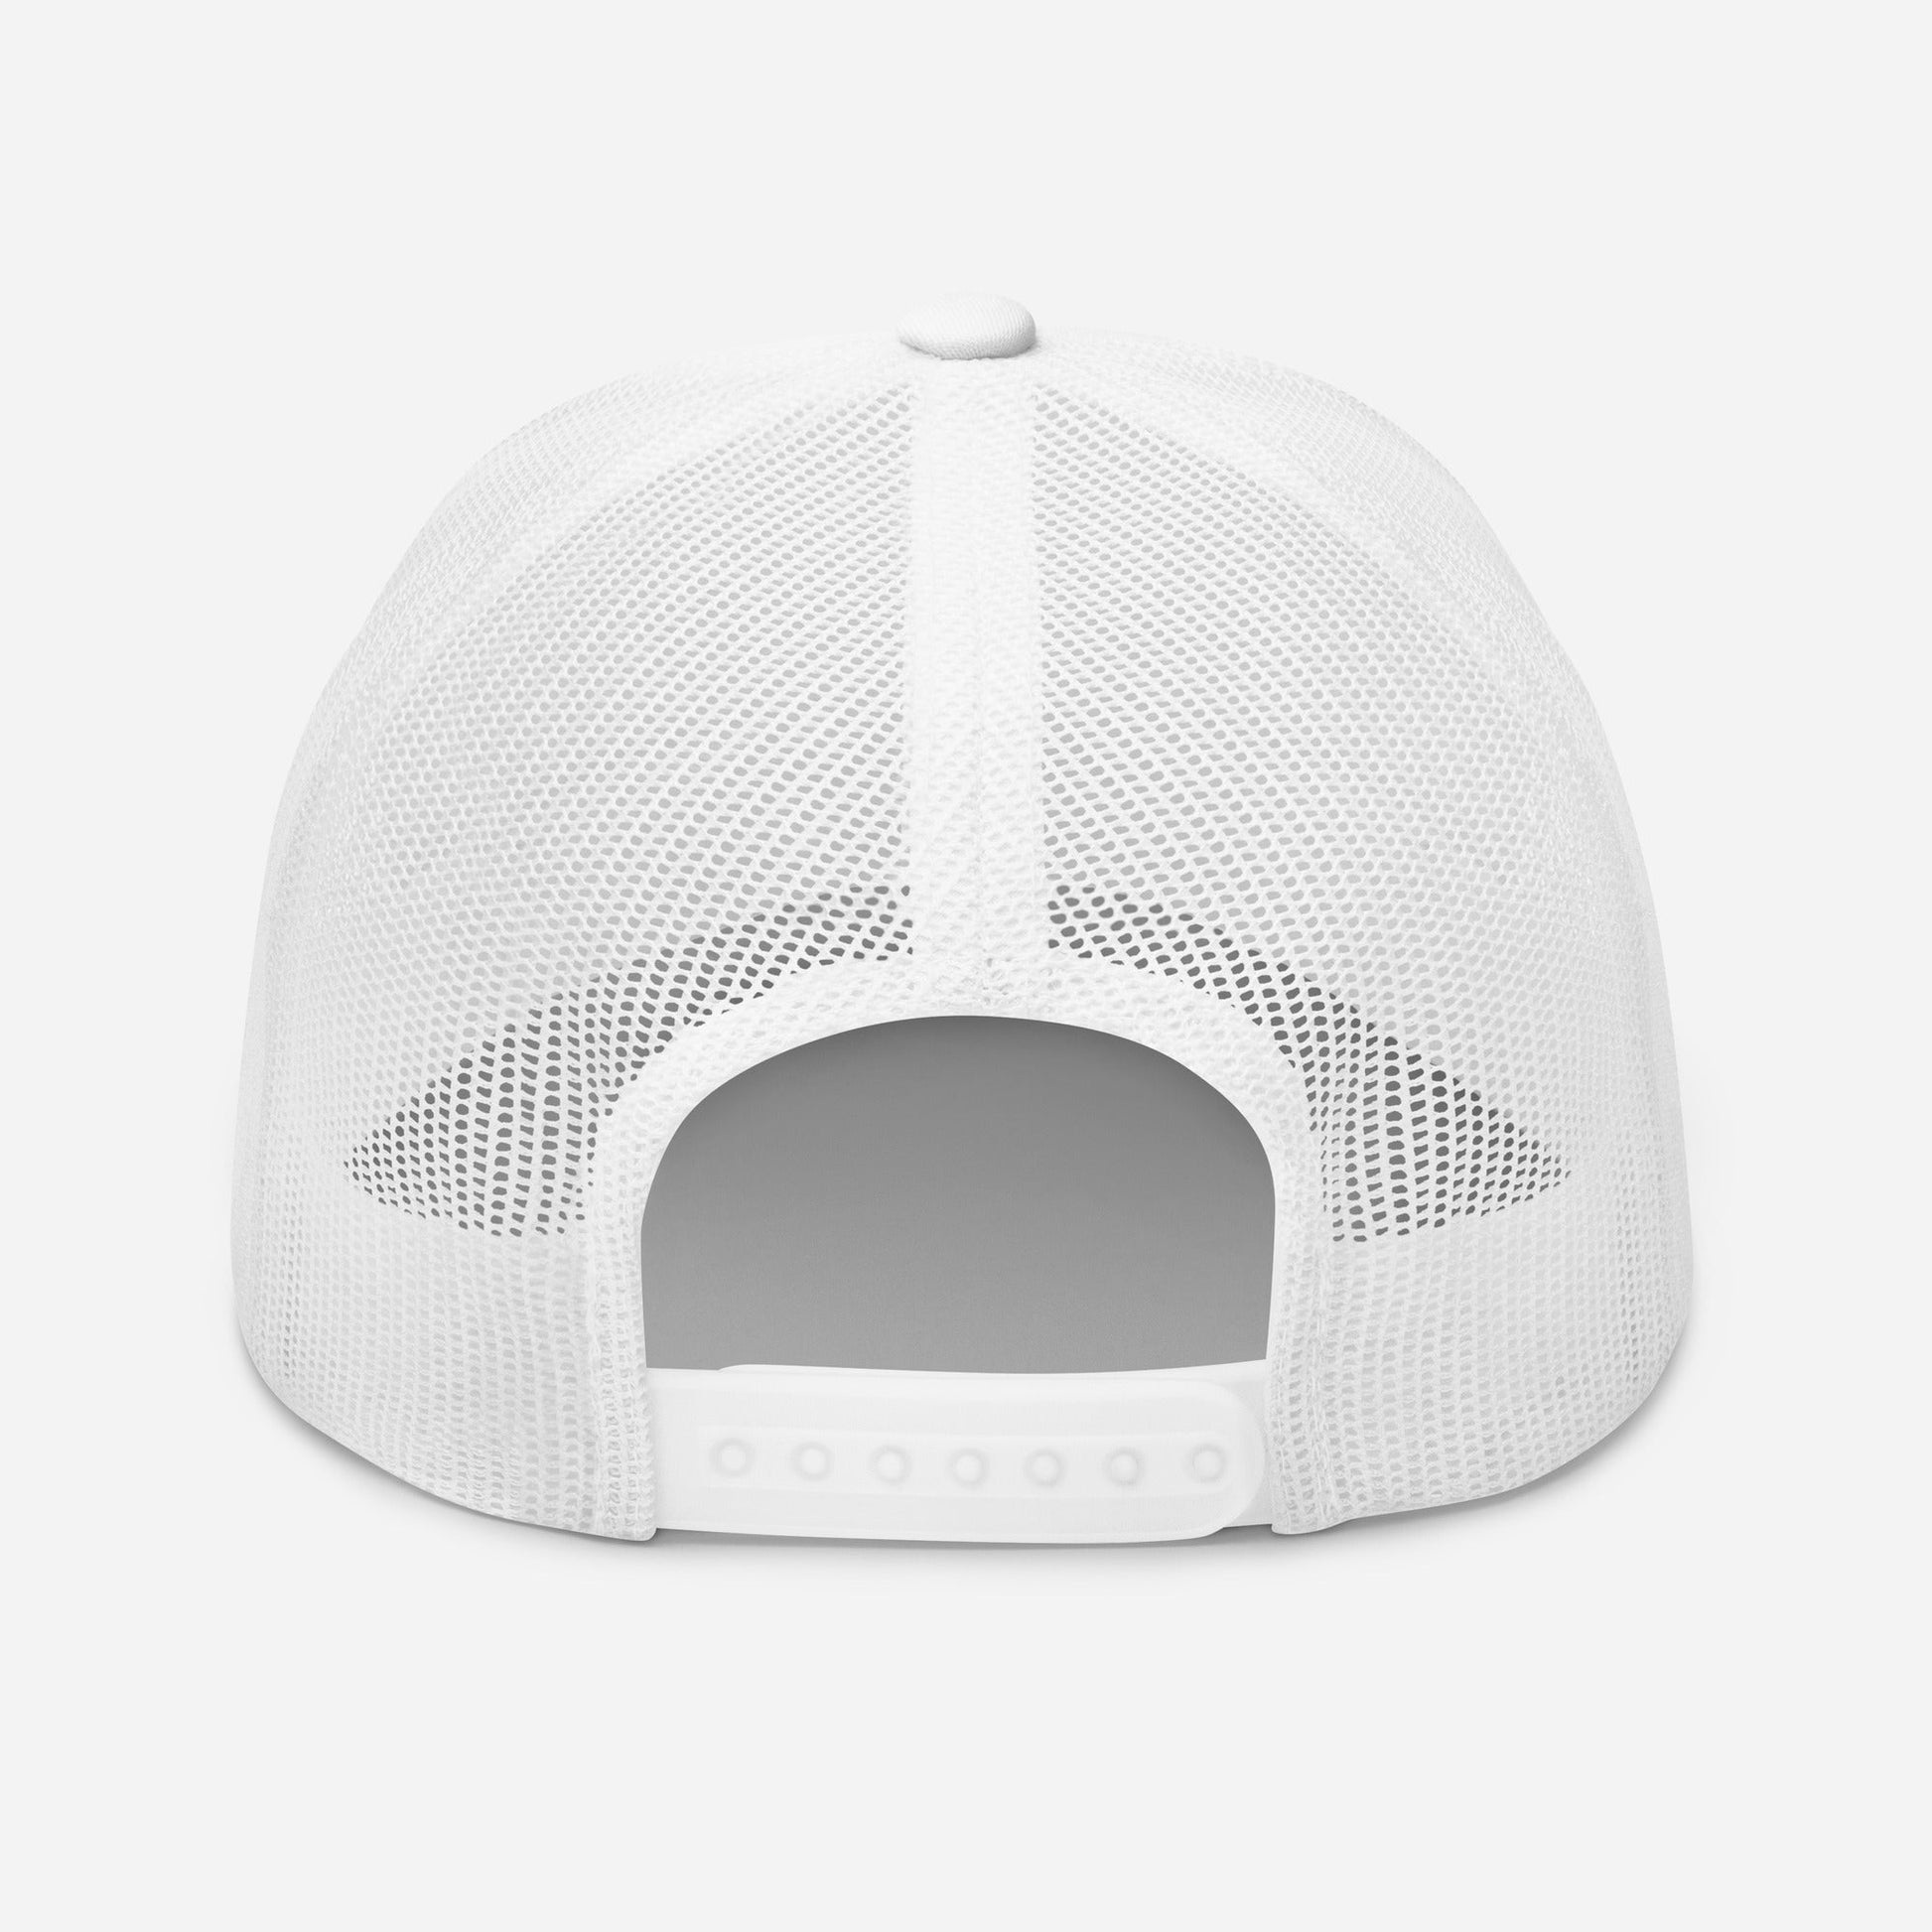 Sunzout Mesh Hat - Sunzout Outdoor Spaces LLC